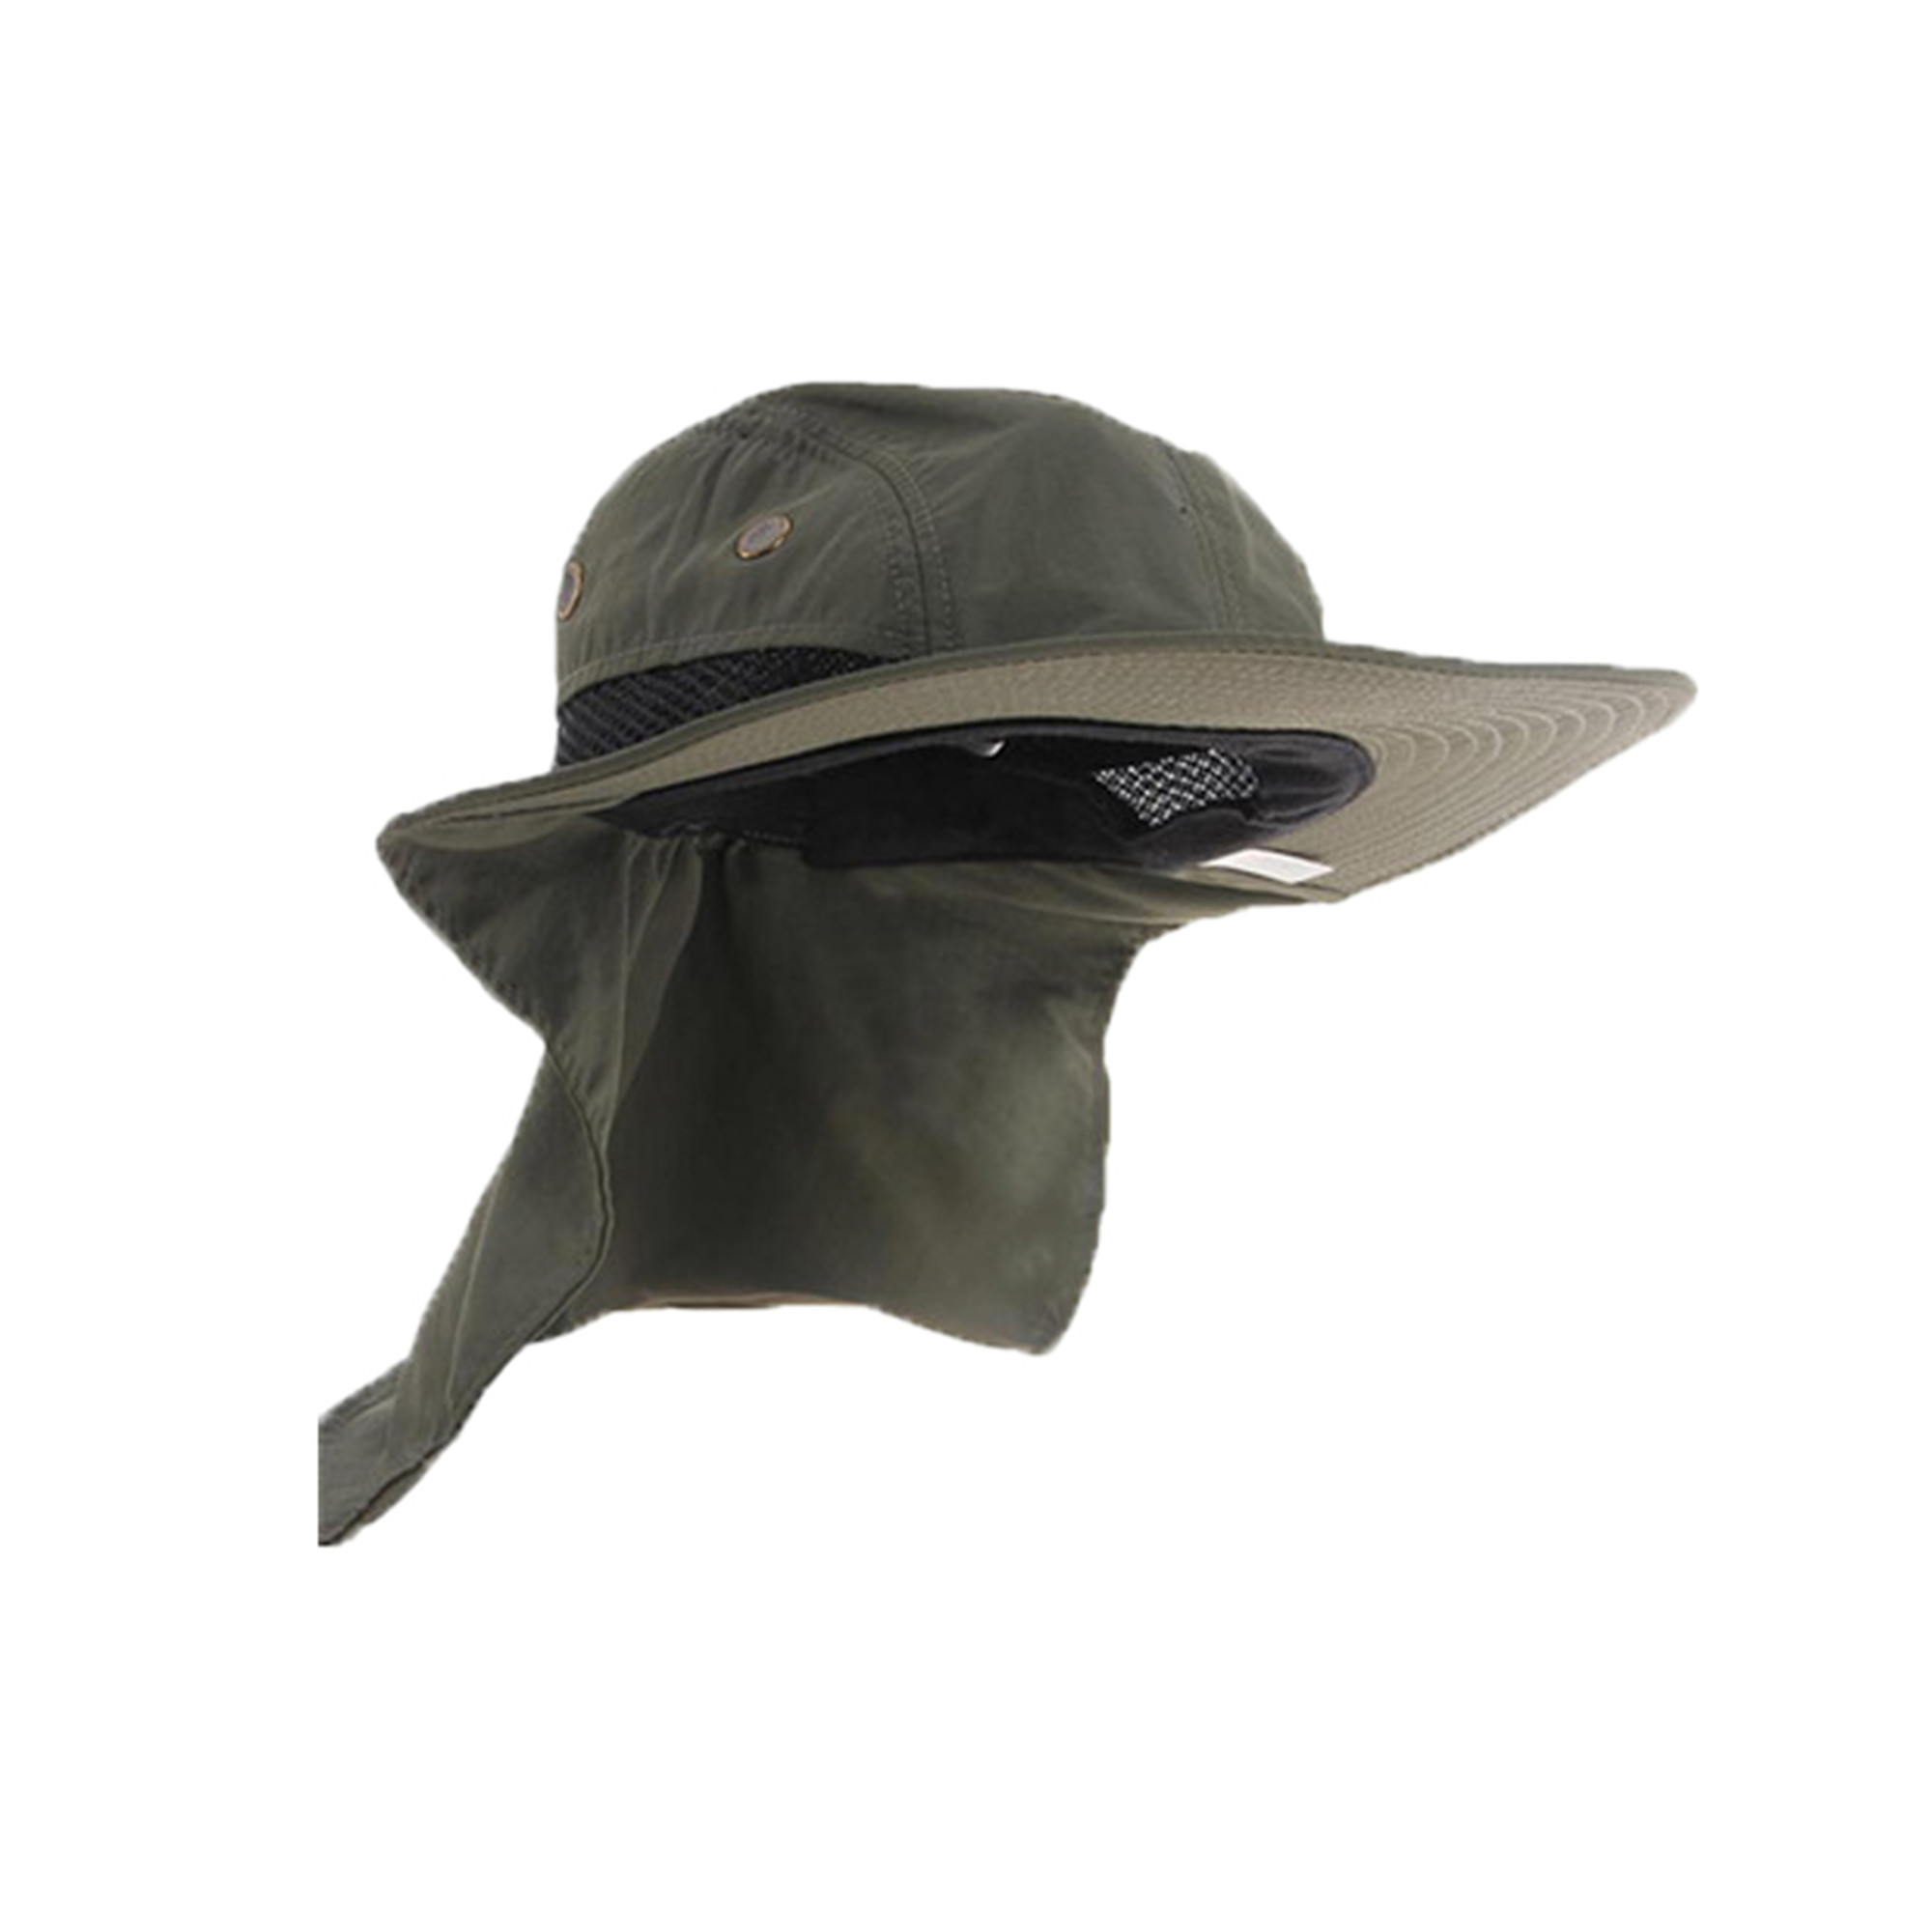 Sunisery Outdoor Fishing Hiking Boonie Snap Hat Brim Ear Neck Cover Sun Flap Cap - image 3 of 4